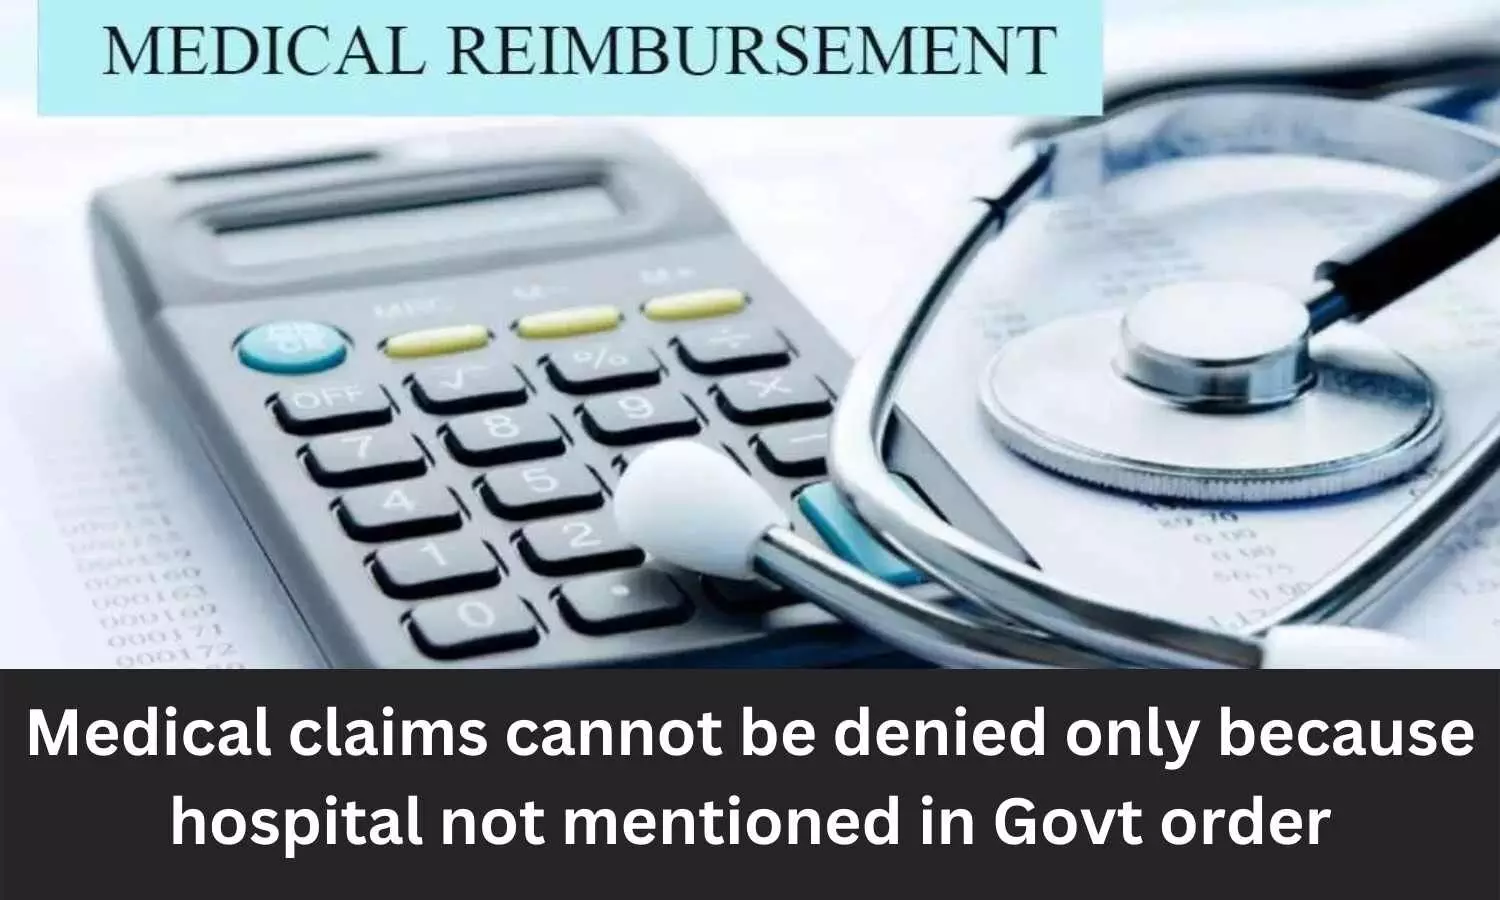 Medical claims cannot be denied only because hospital not mentioned in Govt order: HC